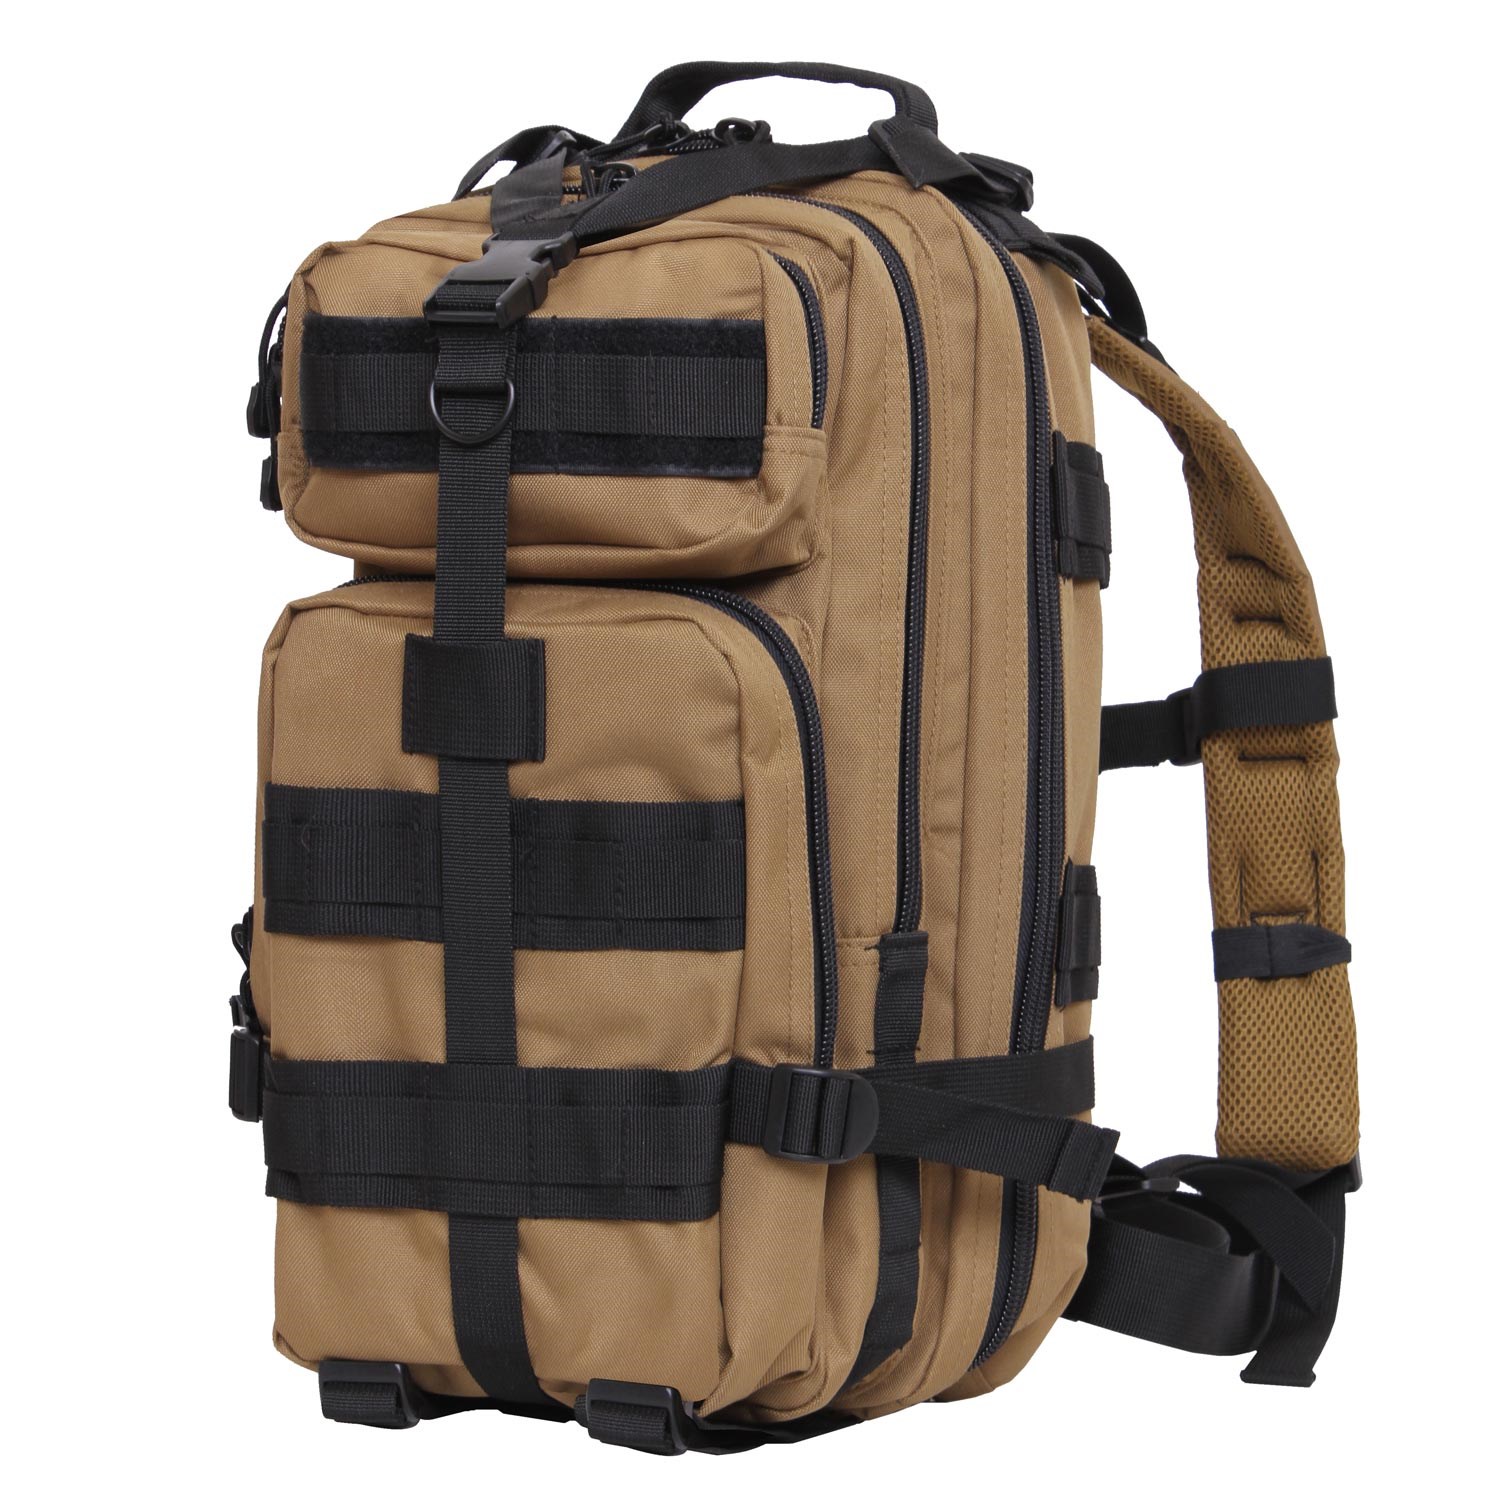 Medium TRANSPORT Pack COYOTE/BROWN ROTHCO 2647 L-11